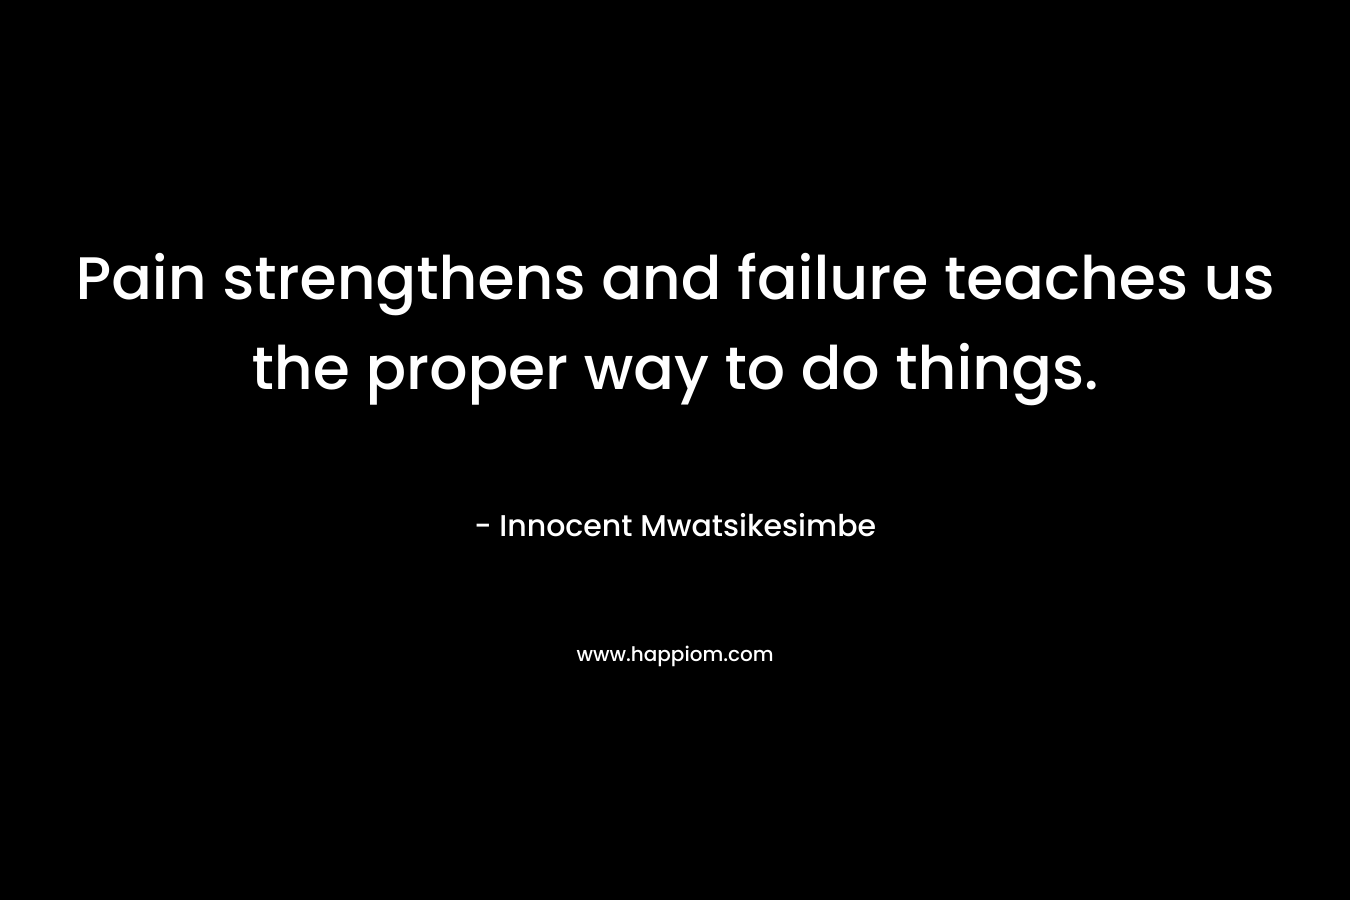 Pain strengthens and failure teaches us the proper way to do things.